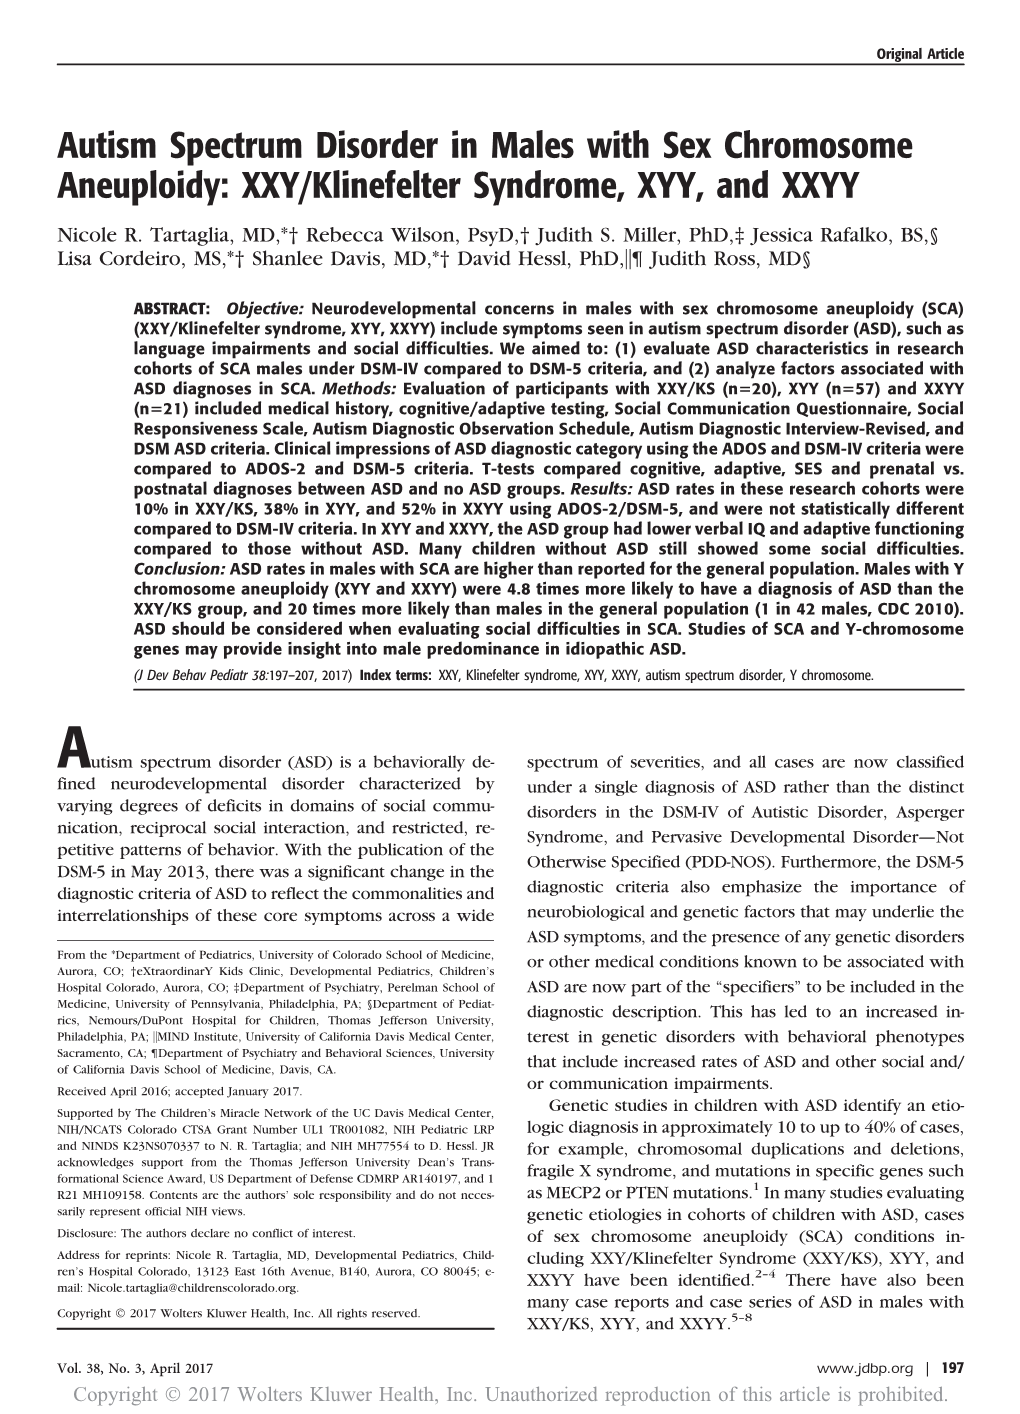 Autism Spectrum Disorder In Males With Sex Chromosome Aneuploidy Xxyklinefelter Syndrome Xyy 0124